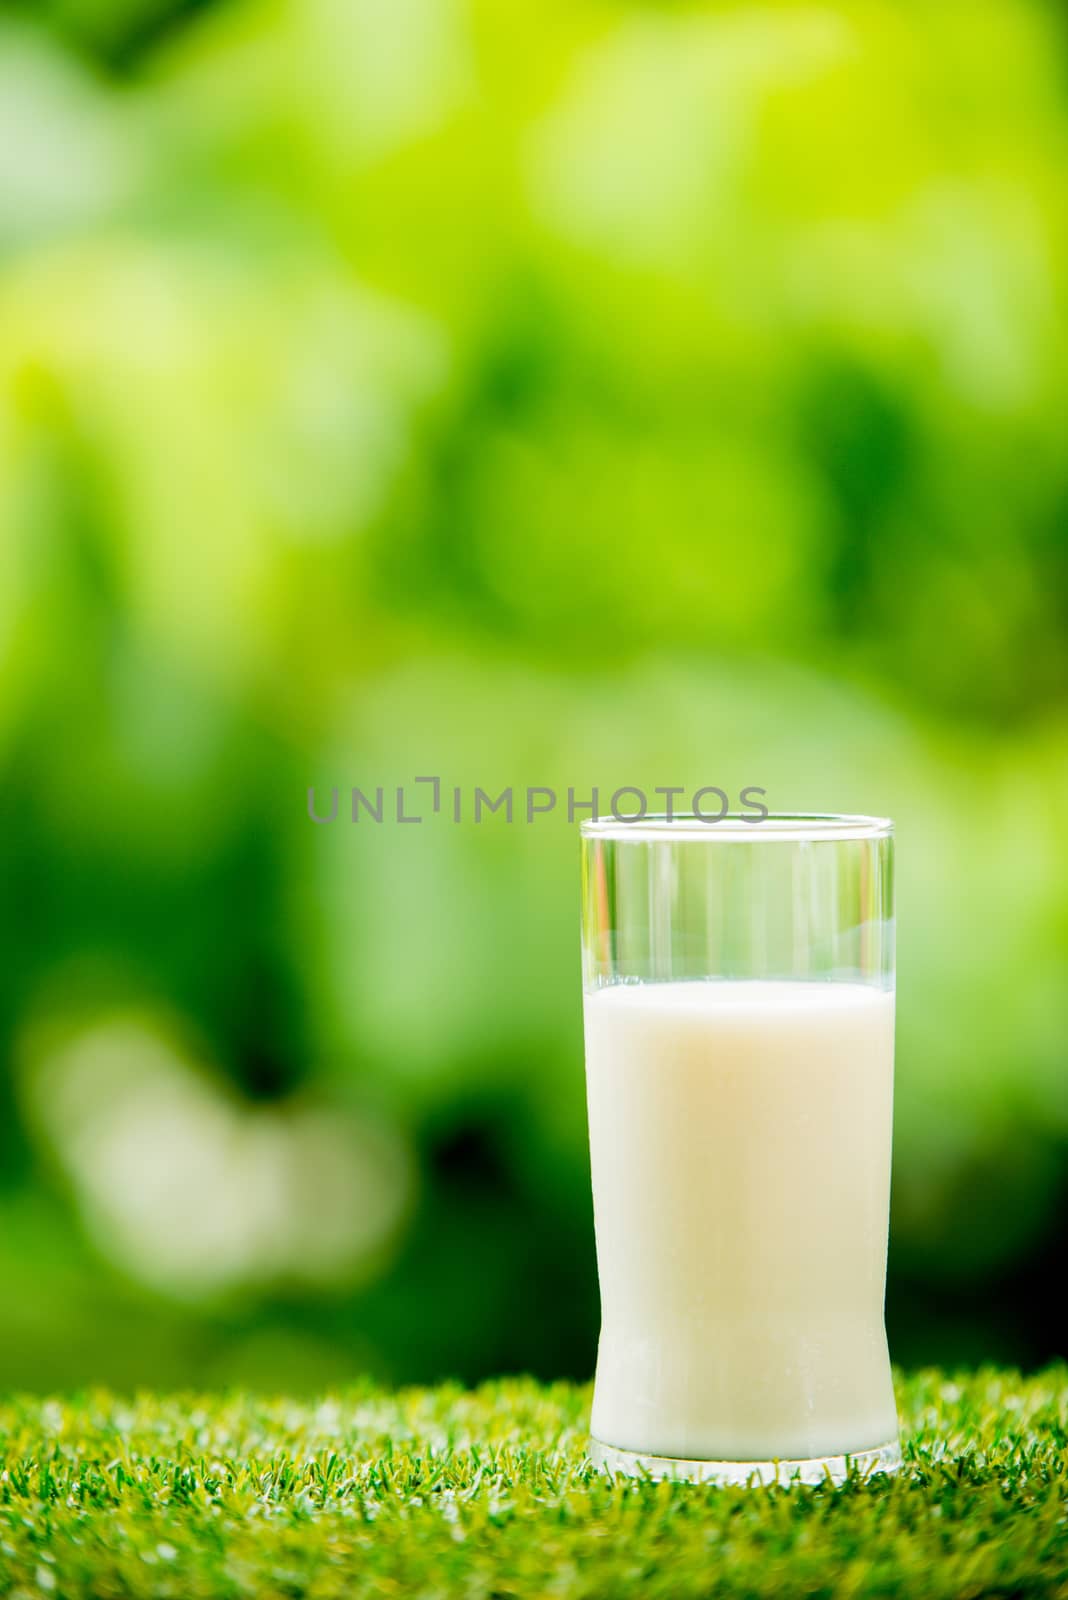 milk glass on grass with nature background